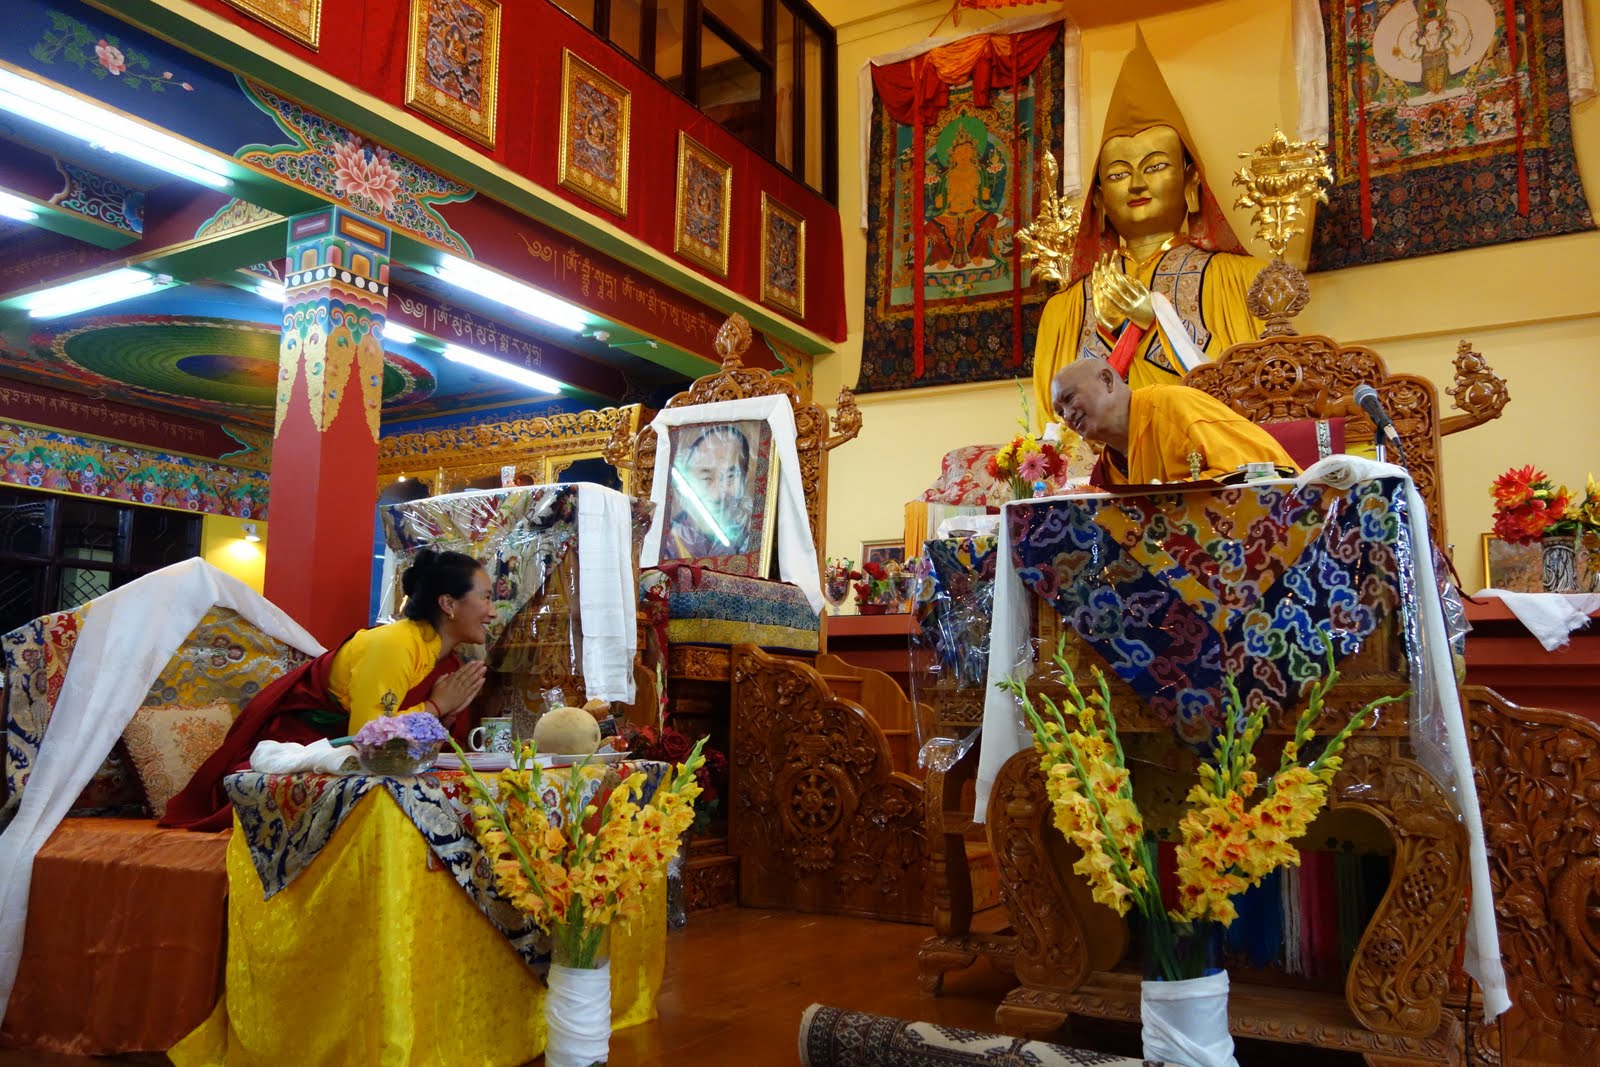 At the end of the Lama Chopa, June 4, 2013, Rinpoche was requesting Khadro-la to give a short talk in Tushita gompa Mcloed Ganj. Photo. Ven.  Roger Kunsang.